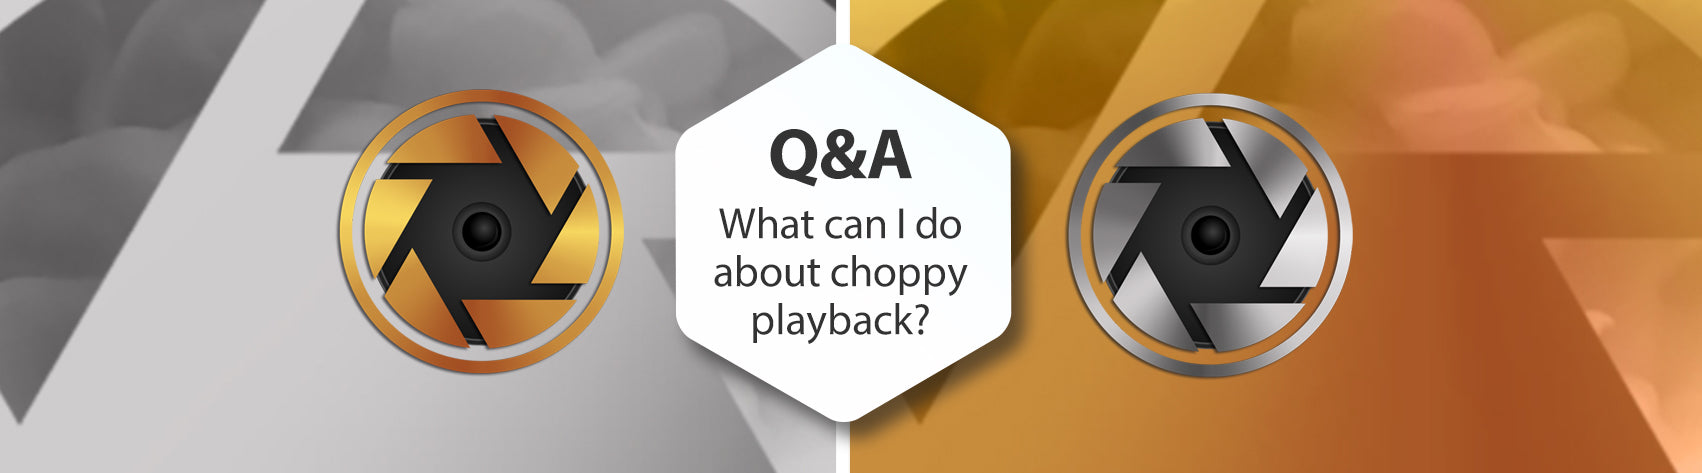 Q&A - What can I do about choppy playback?